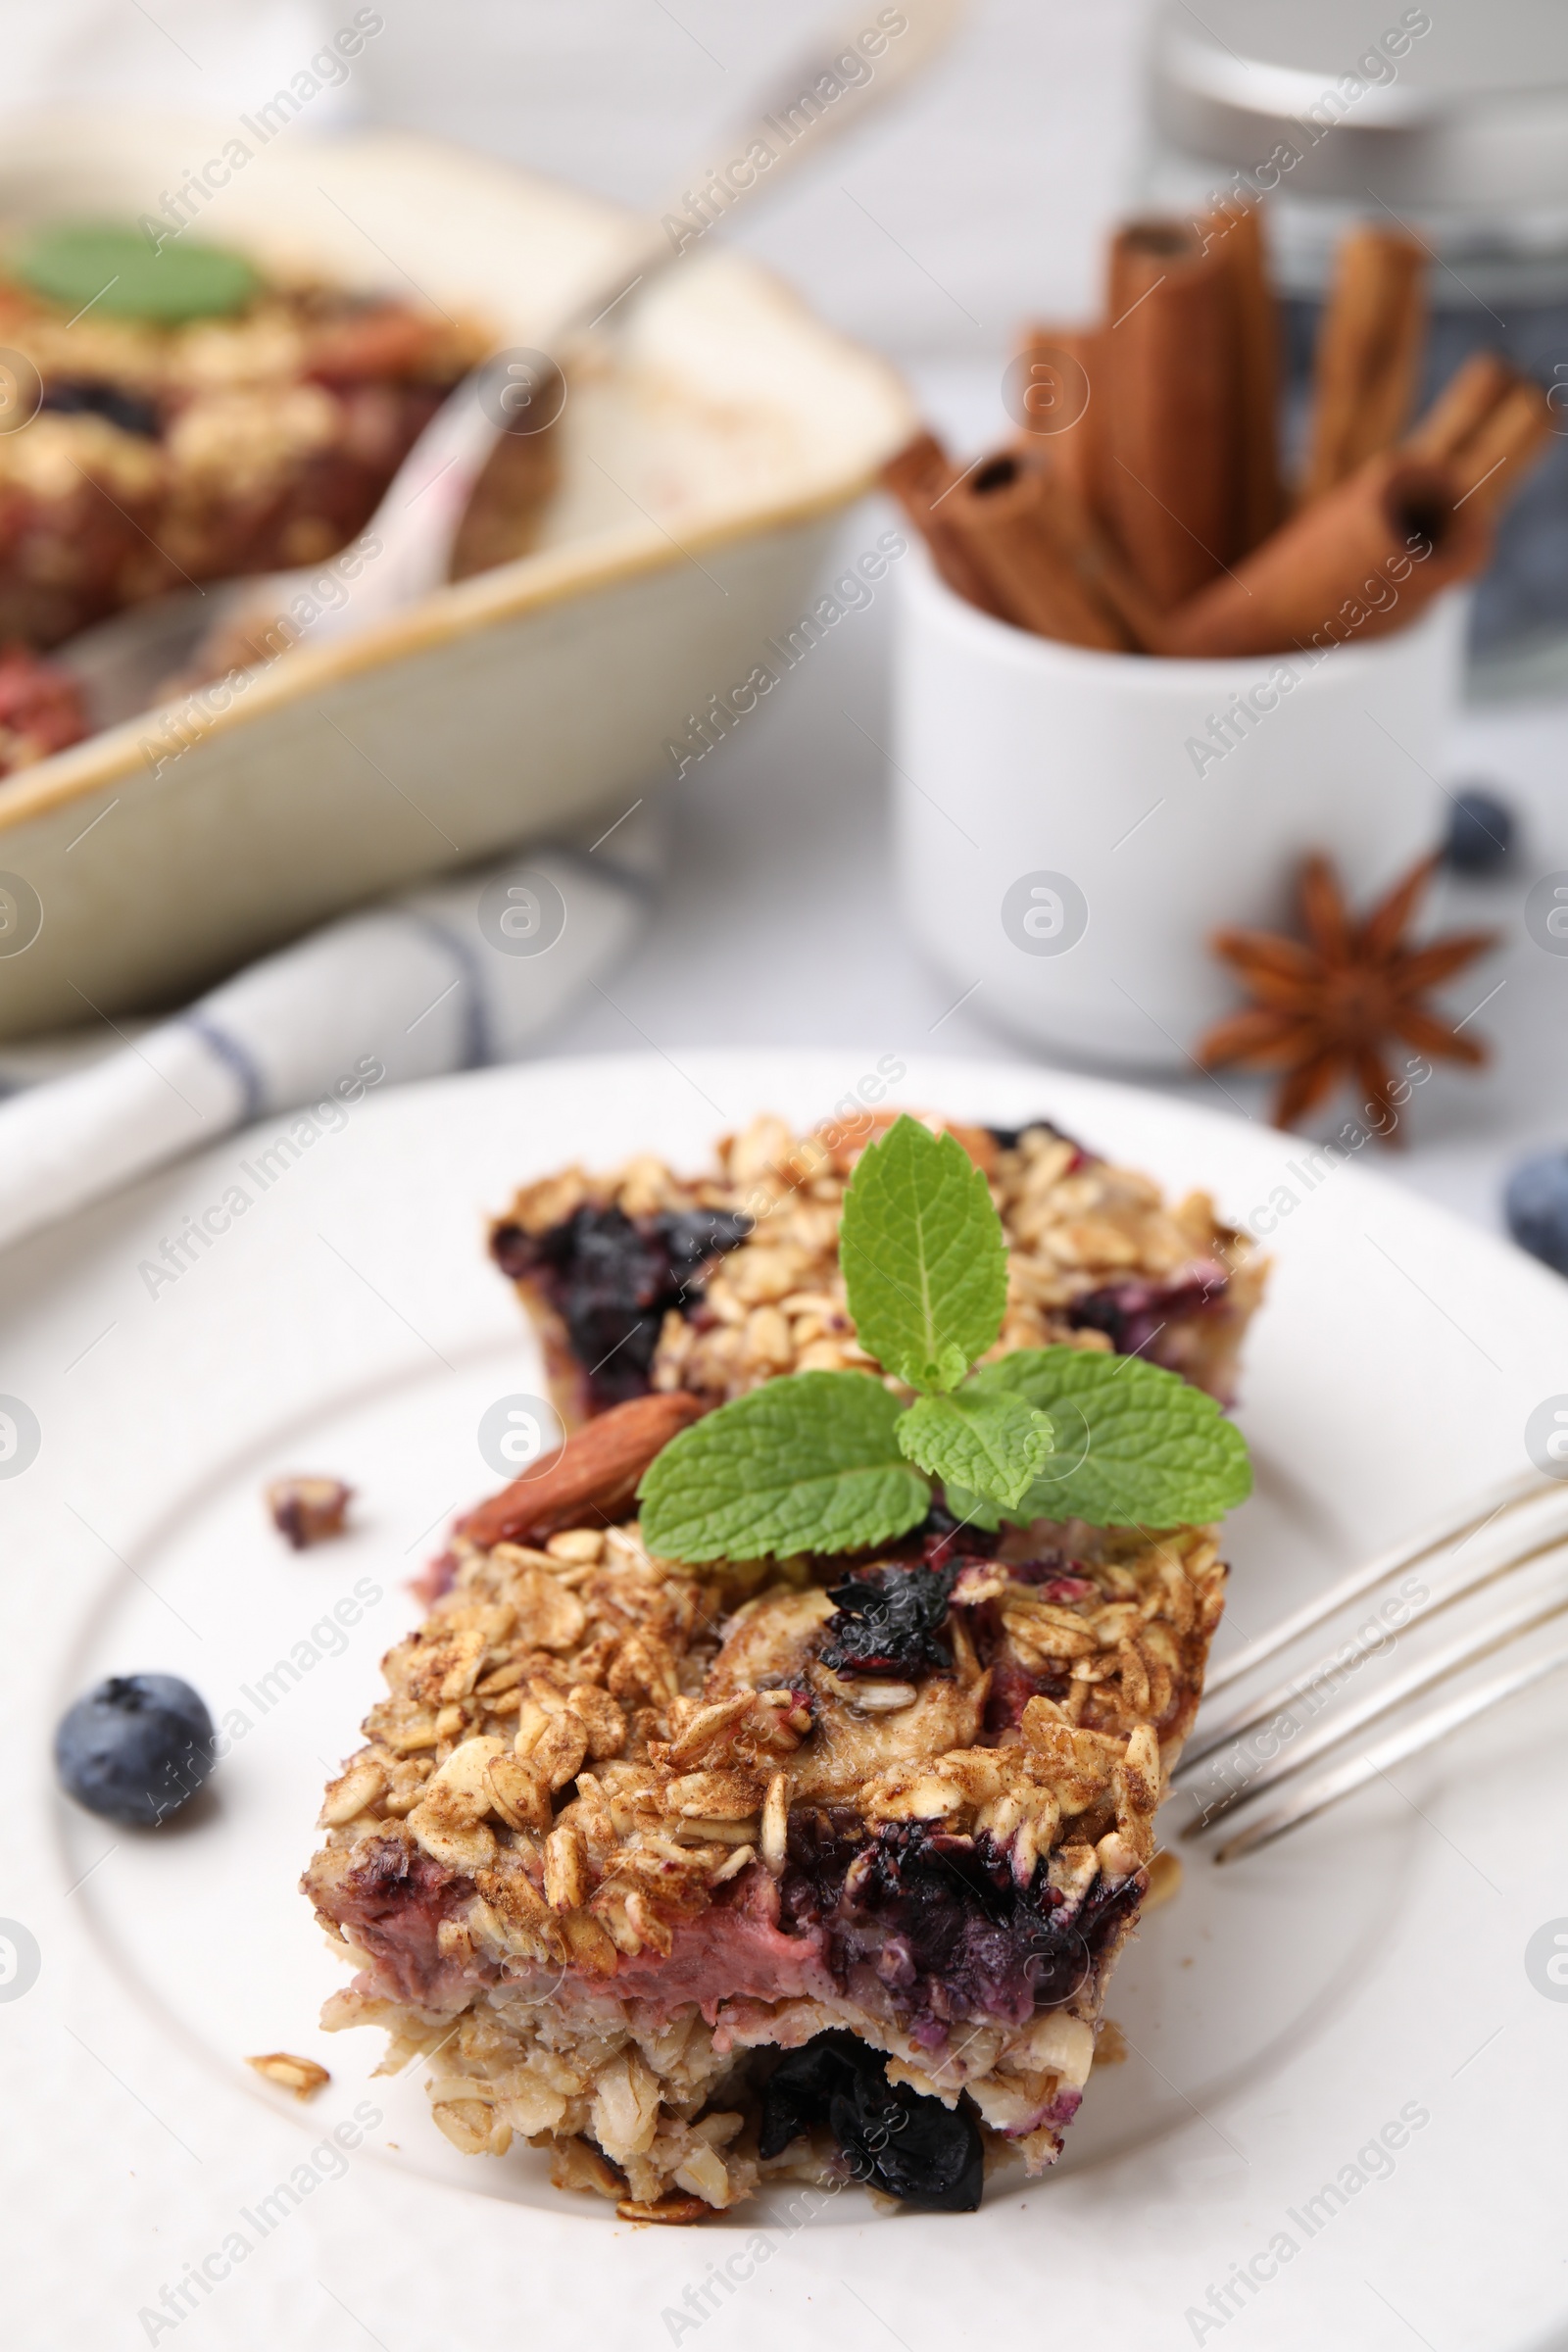 Photo of Tasty baked oatmeal with berries on table, closeup